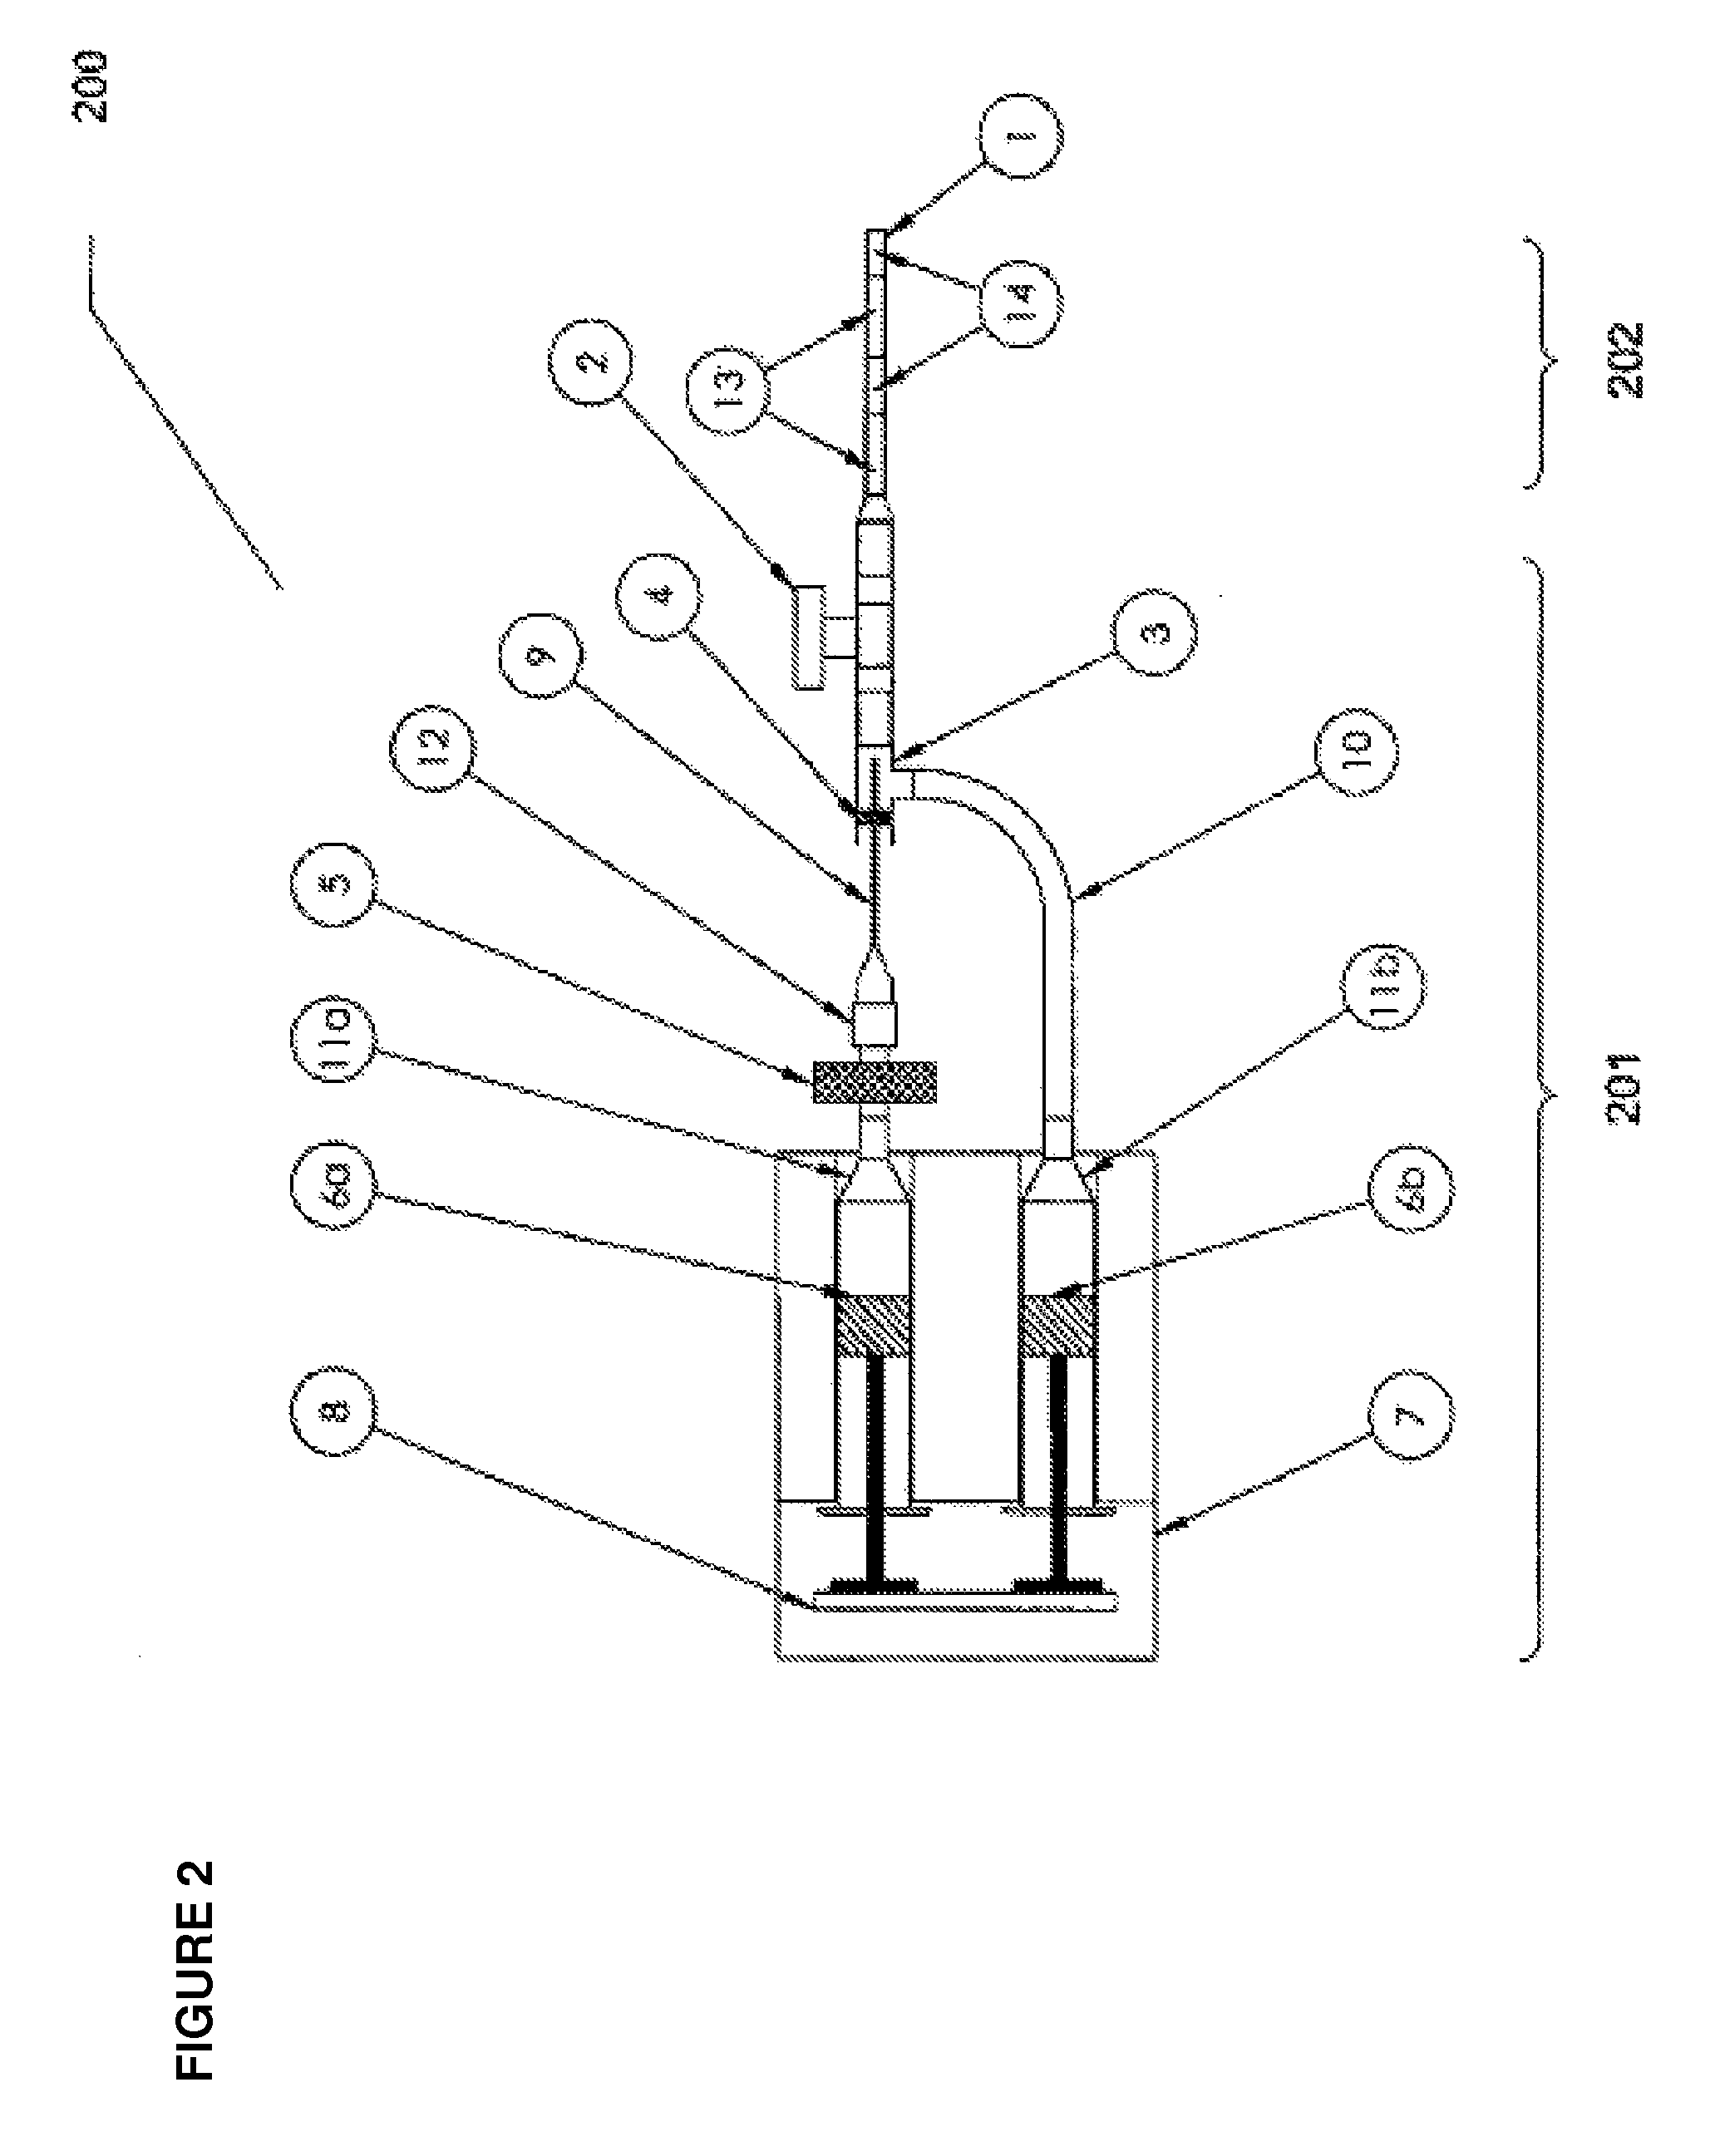 Contrast agent injection system for sonographic imaging